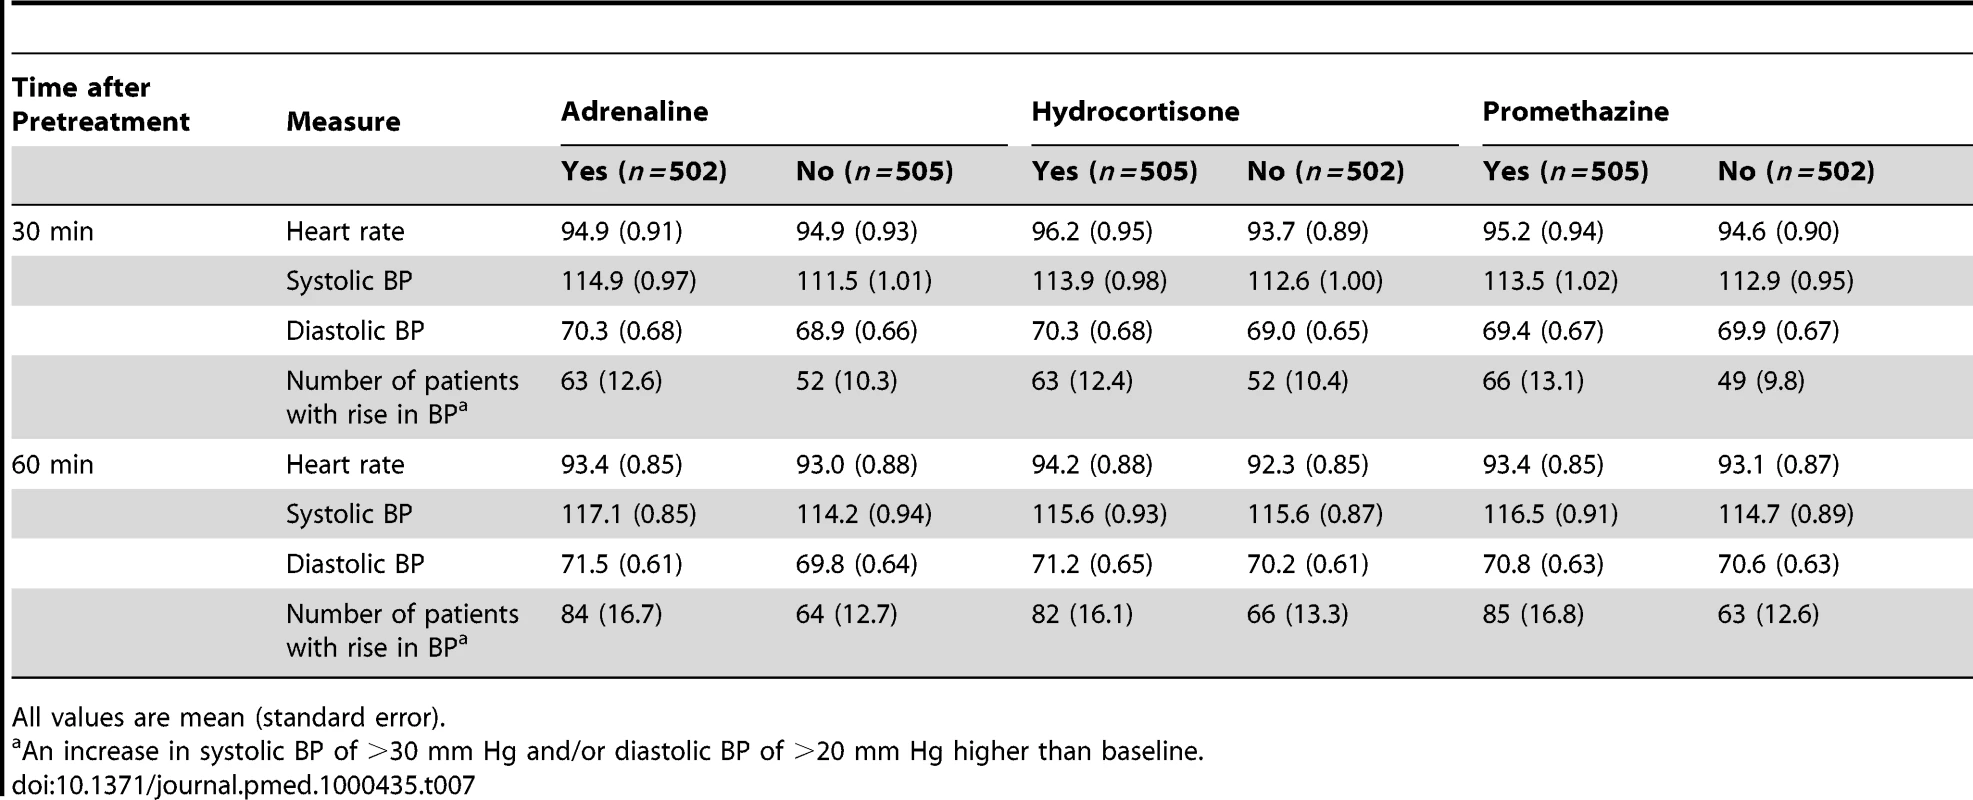 Heart rate, blood pressure, and number of patients with rise in blood pressure at 30 min and 60 min after pretreatment administered.